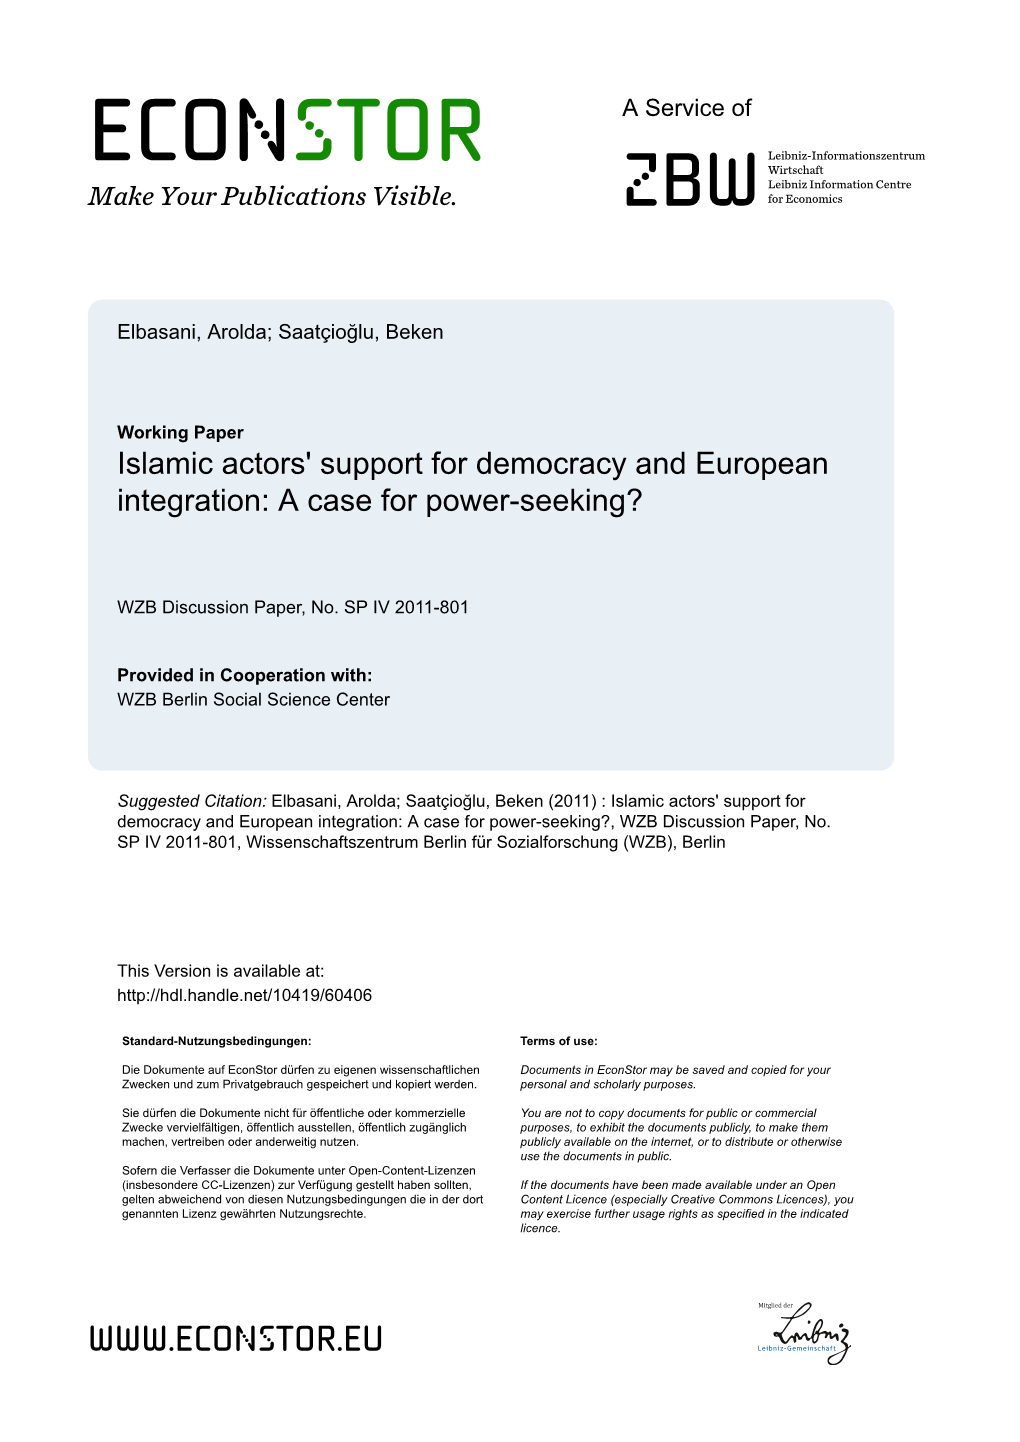 Islamic Actors' Support for Democracy and European Integration: a Case for Power-Seeking?